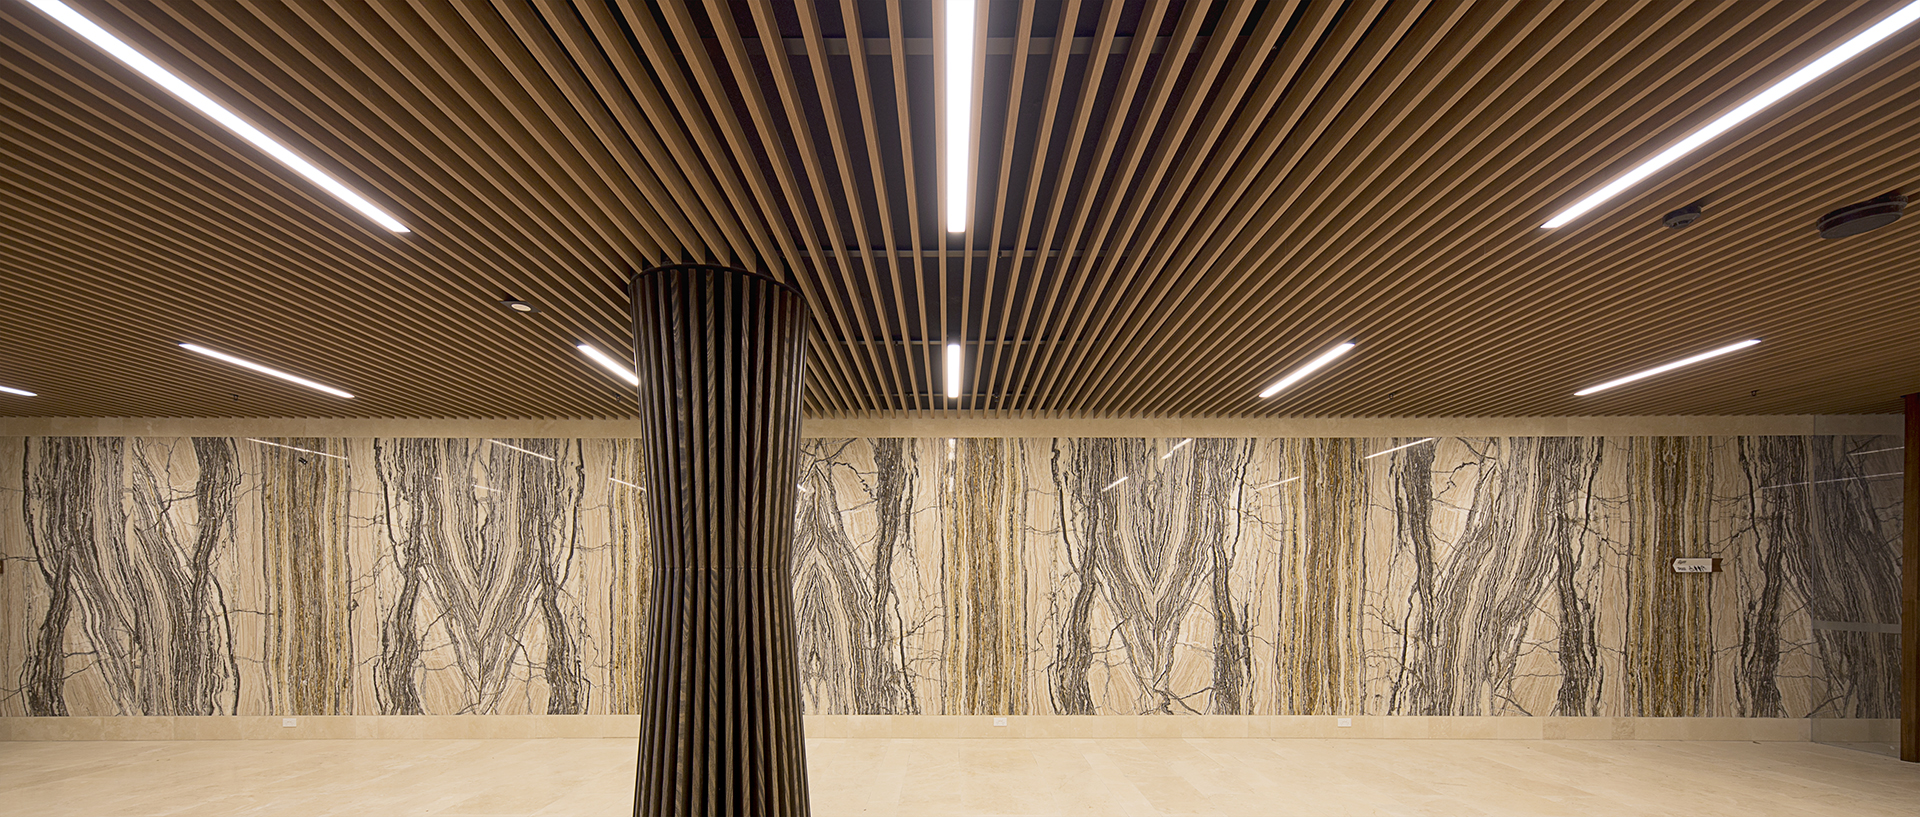  Lakeside Apartments Lobby - Melbourne VIC Ever Art Wood® Kabebari-T Suspended Ceiling System - Kabebari 30x85 battens in Kuri Masame; Custom powdercoated T section in Black 